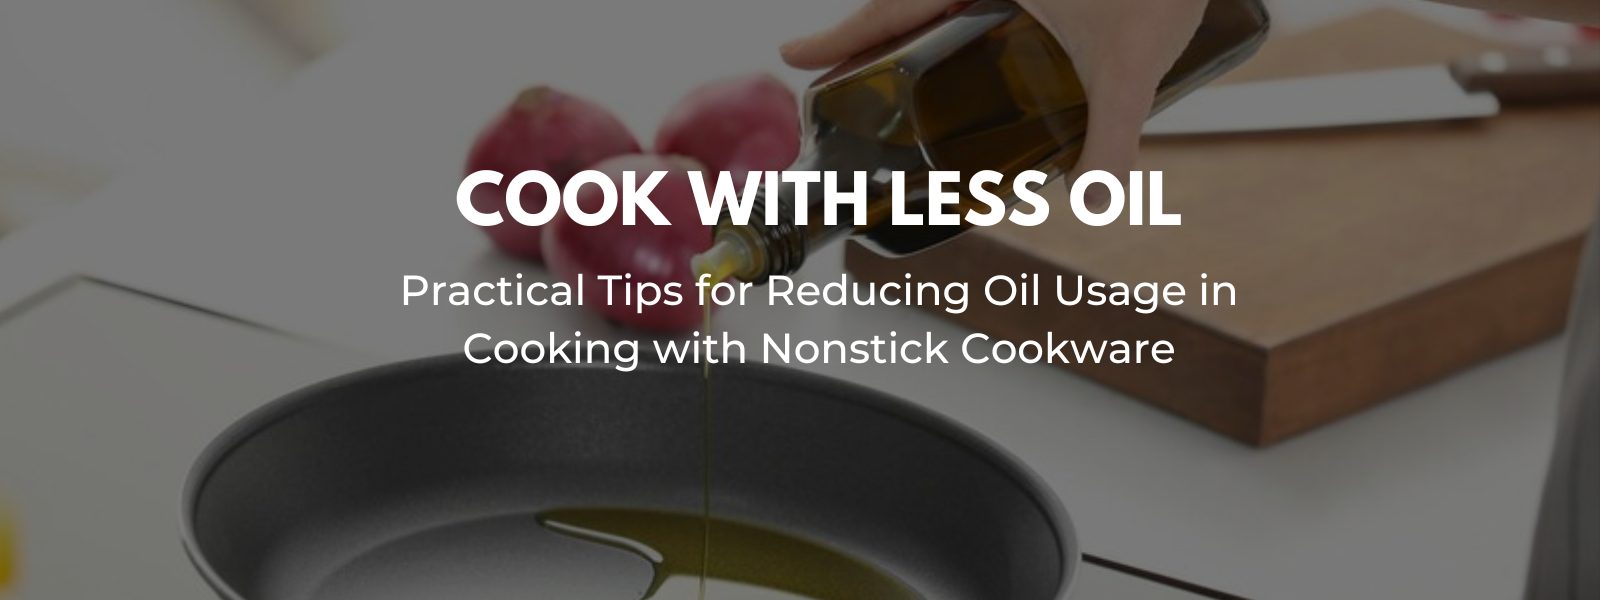 Practical Tips for Reducing Oil Usage in Cooking with Nonstick Cookware